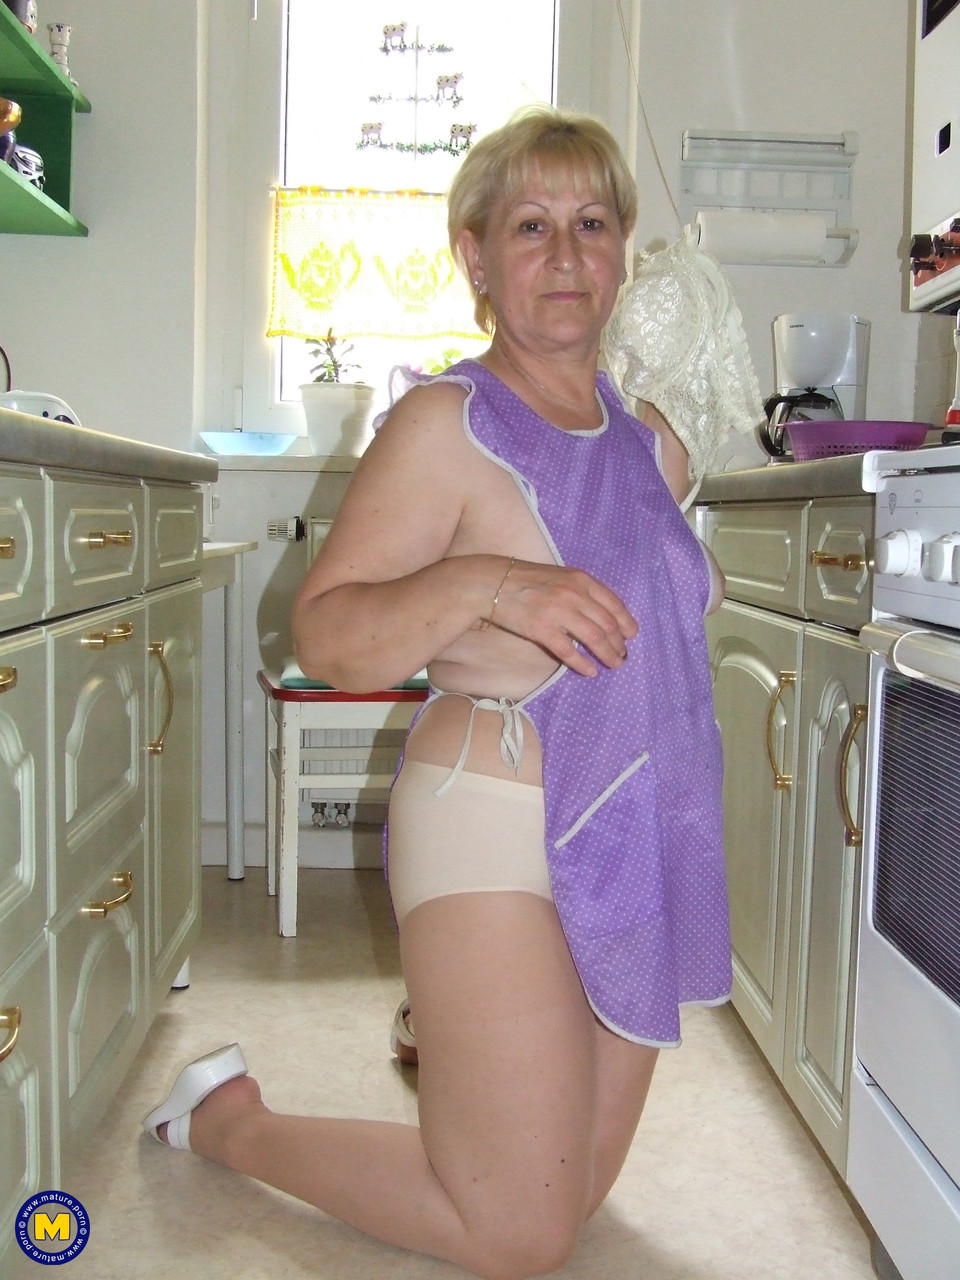 Short haired German cleaning lady Dagmar shows her mature cunt in the kitchen порно фото #425226963 | Mature NL Pics, Dagmar, German, мобильное порно